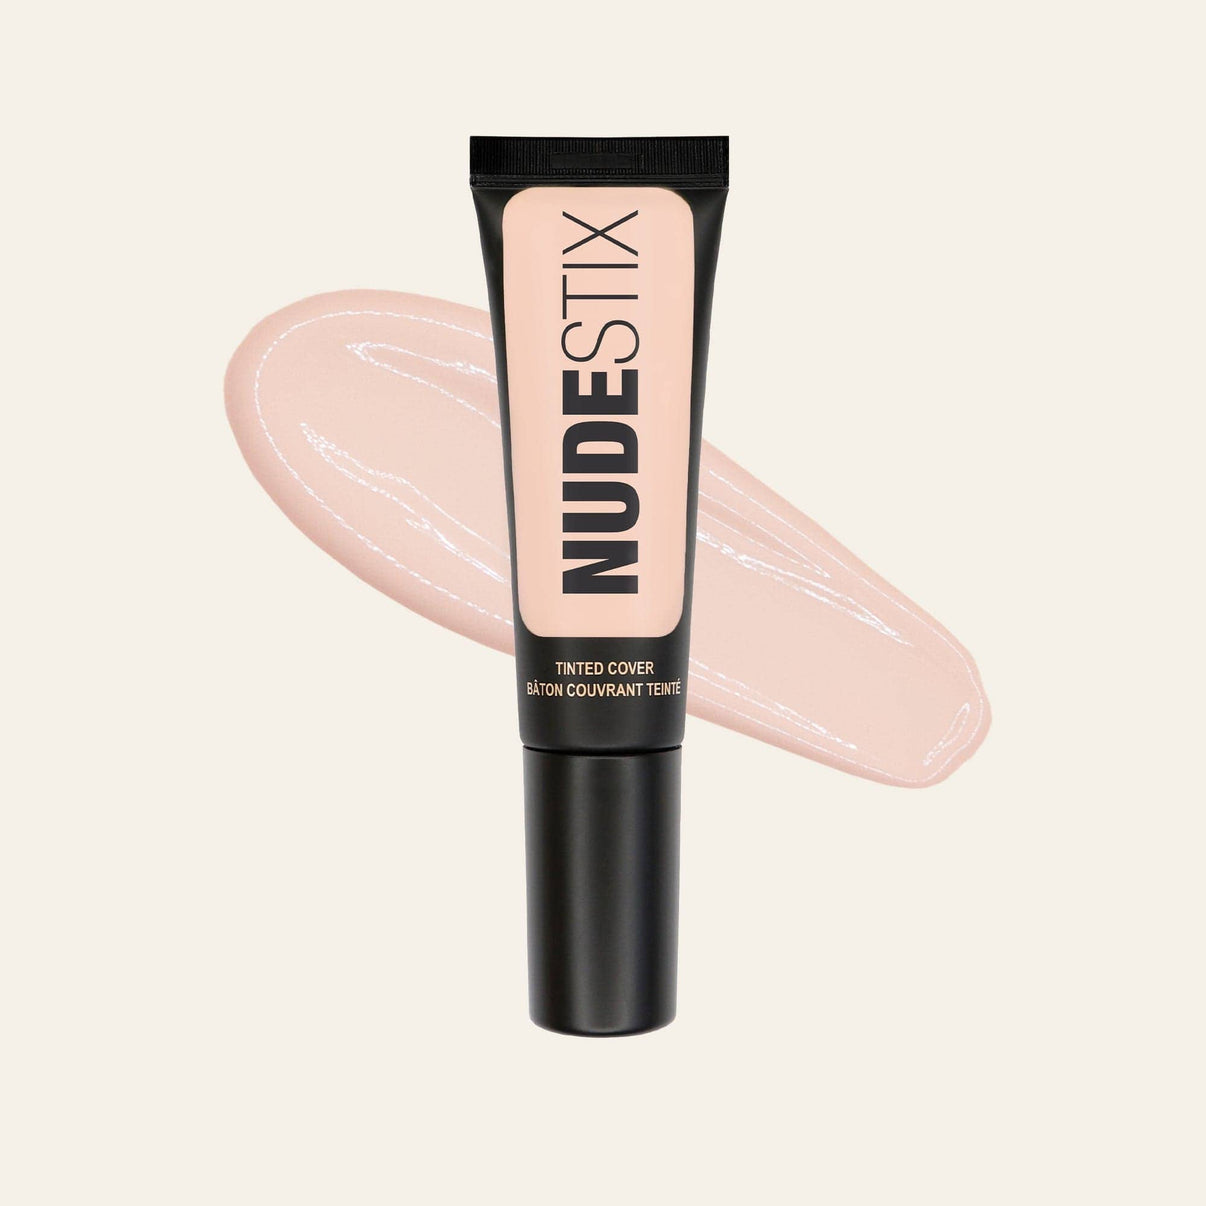 Nude 1 Tinted Cover Liquid Foundation